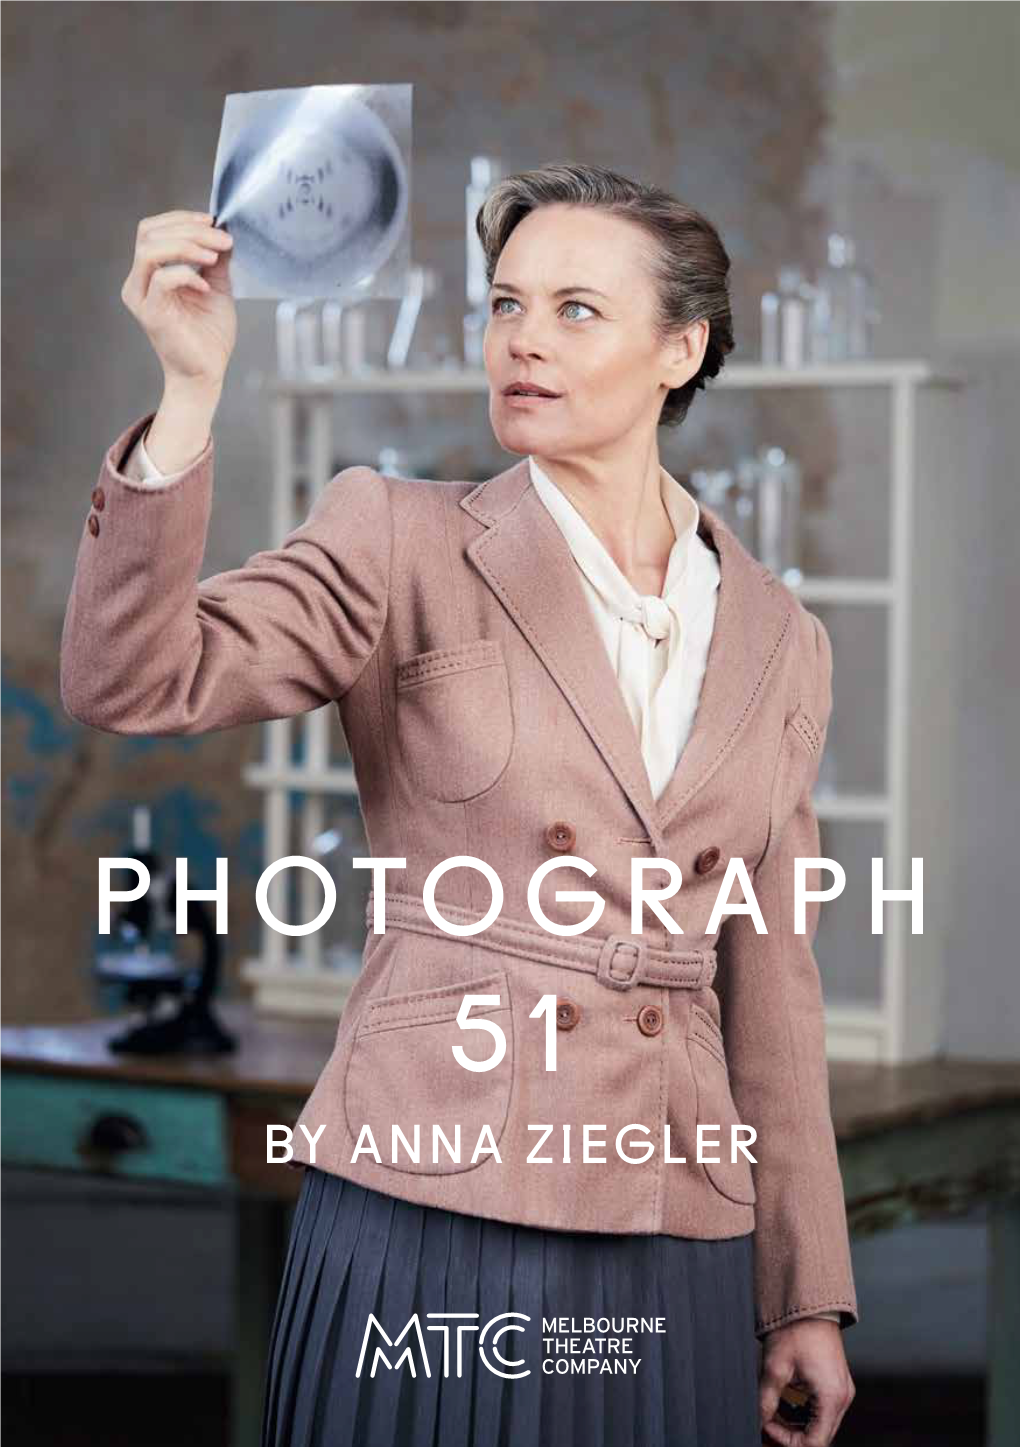 PHOTOGRAPH 51 by ANNA ZIEGLER Welcome